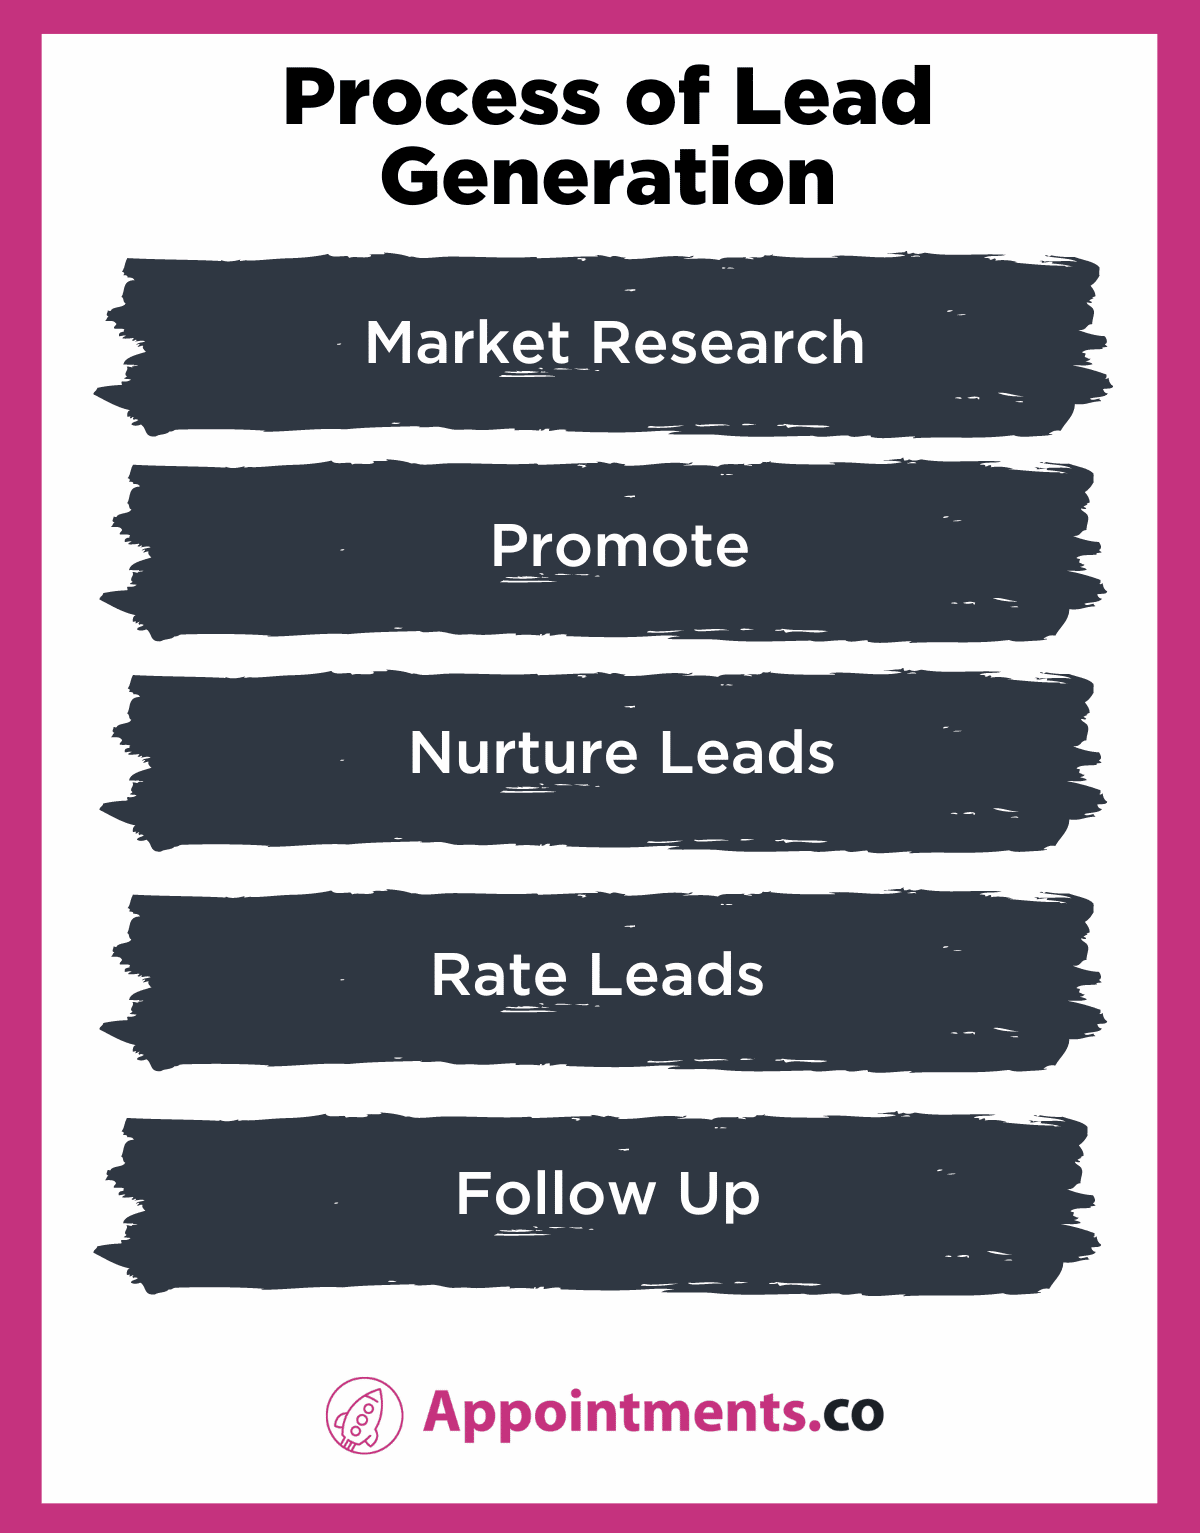 The Process of Lead Generation